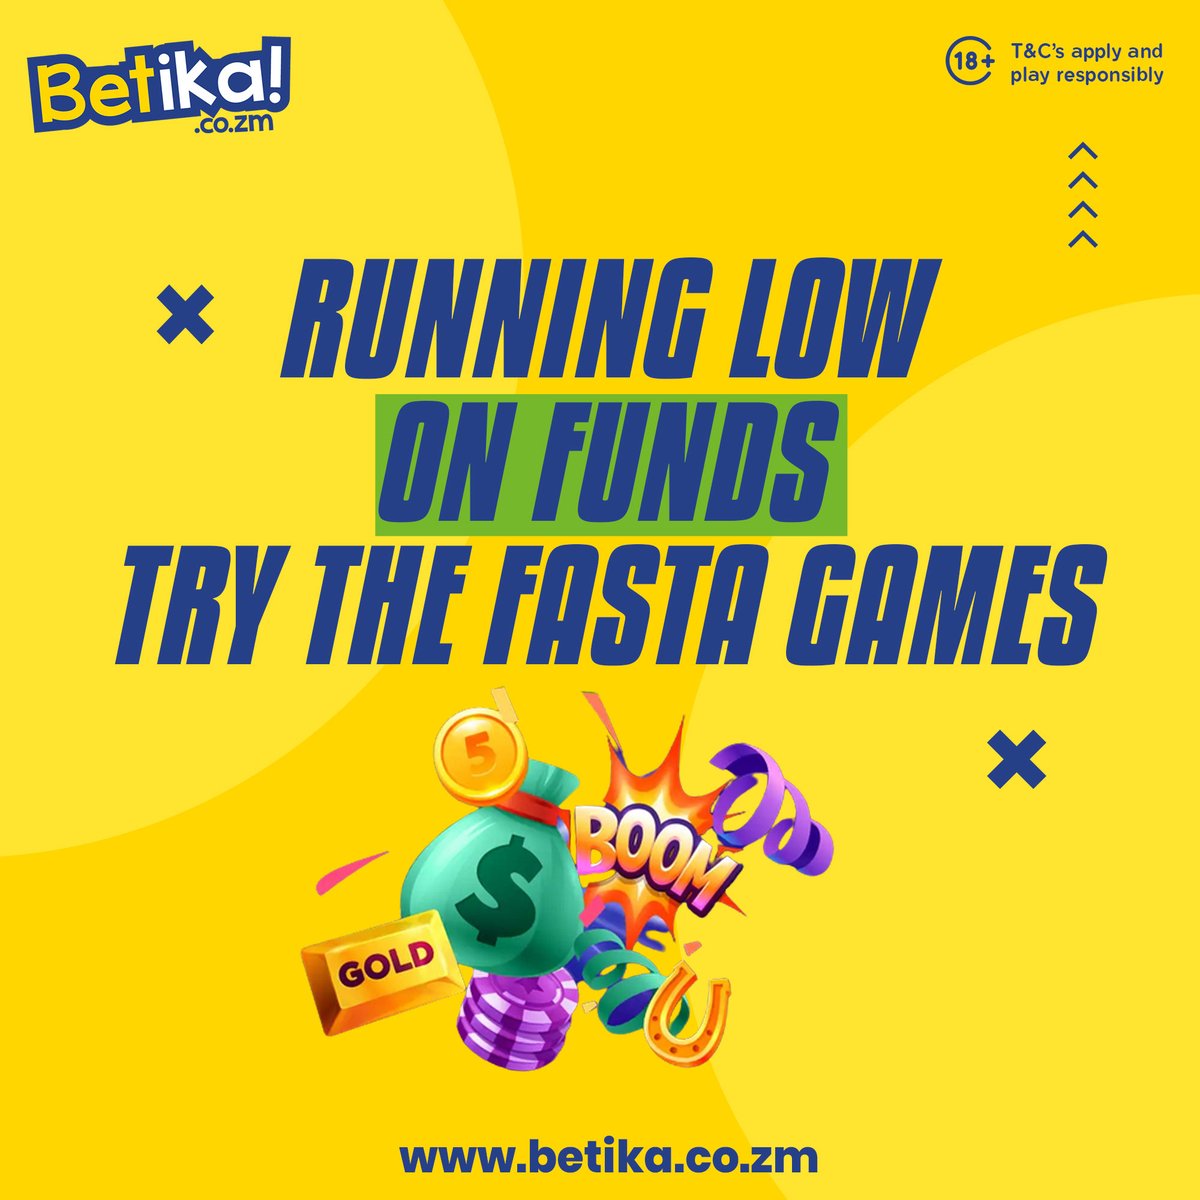 Running low on cash?
With Betika Fasta Games, you can get your competitive fix and take home the win. Plus, with no risk of losing real money, you can play as much as you want.

Play now at betika.co.zm/betika-fasta
#BetikaZambia #BetikaFastaGames